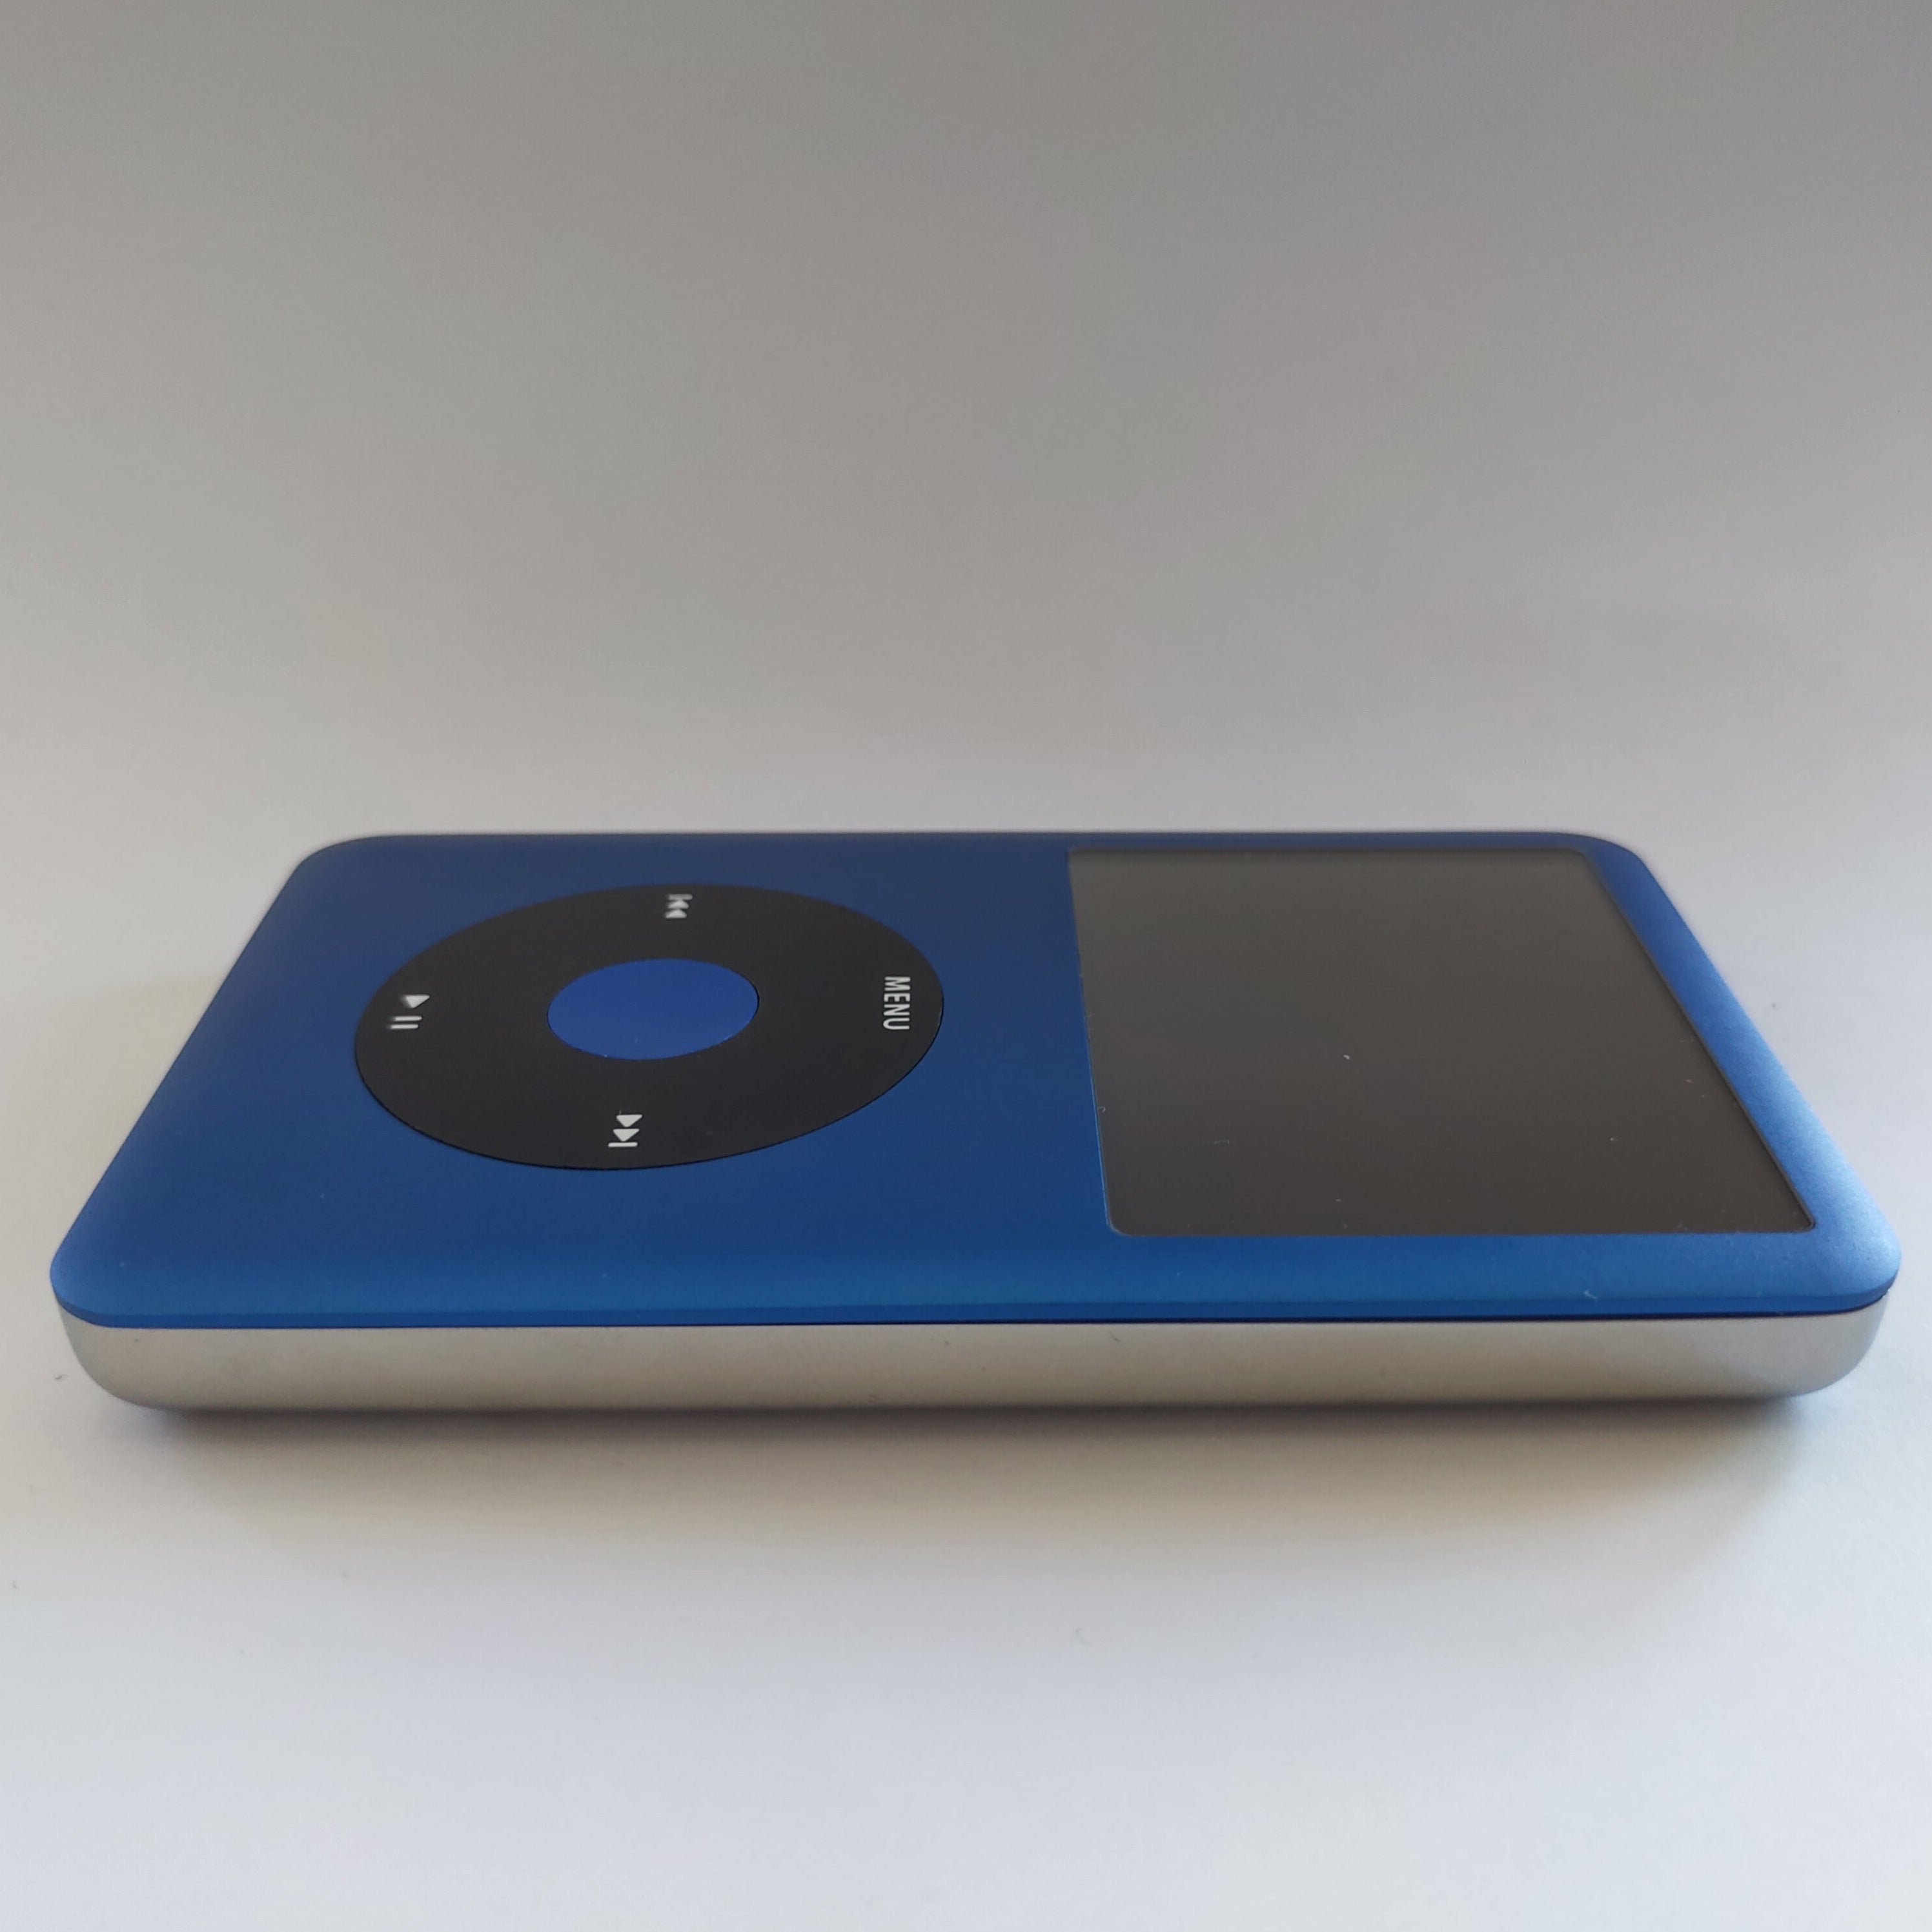 iPod classic - Blue and Black | Flash Storage and Extended Battery